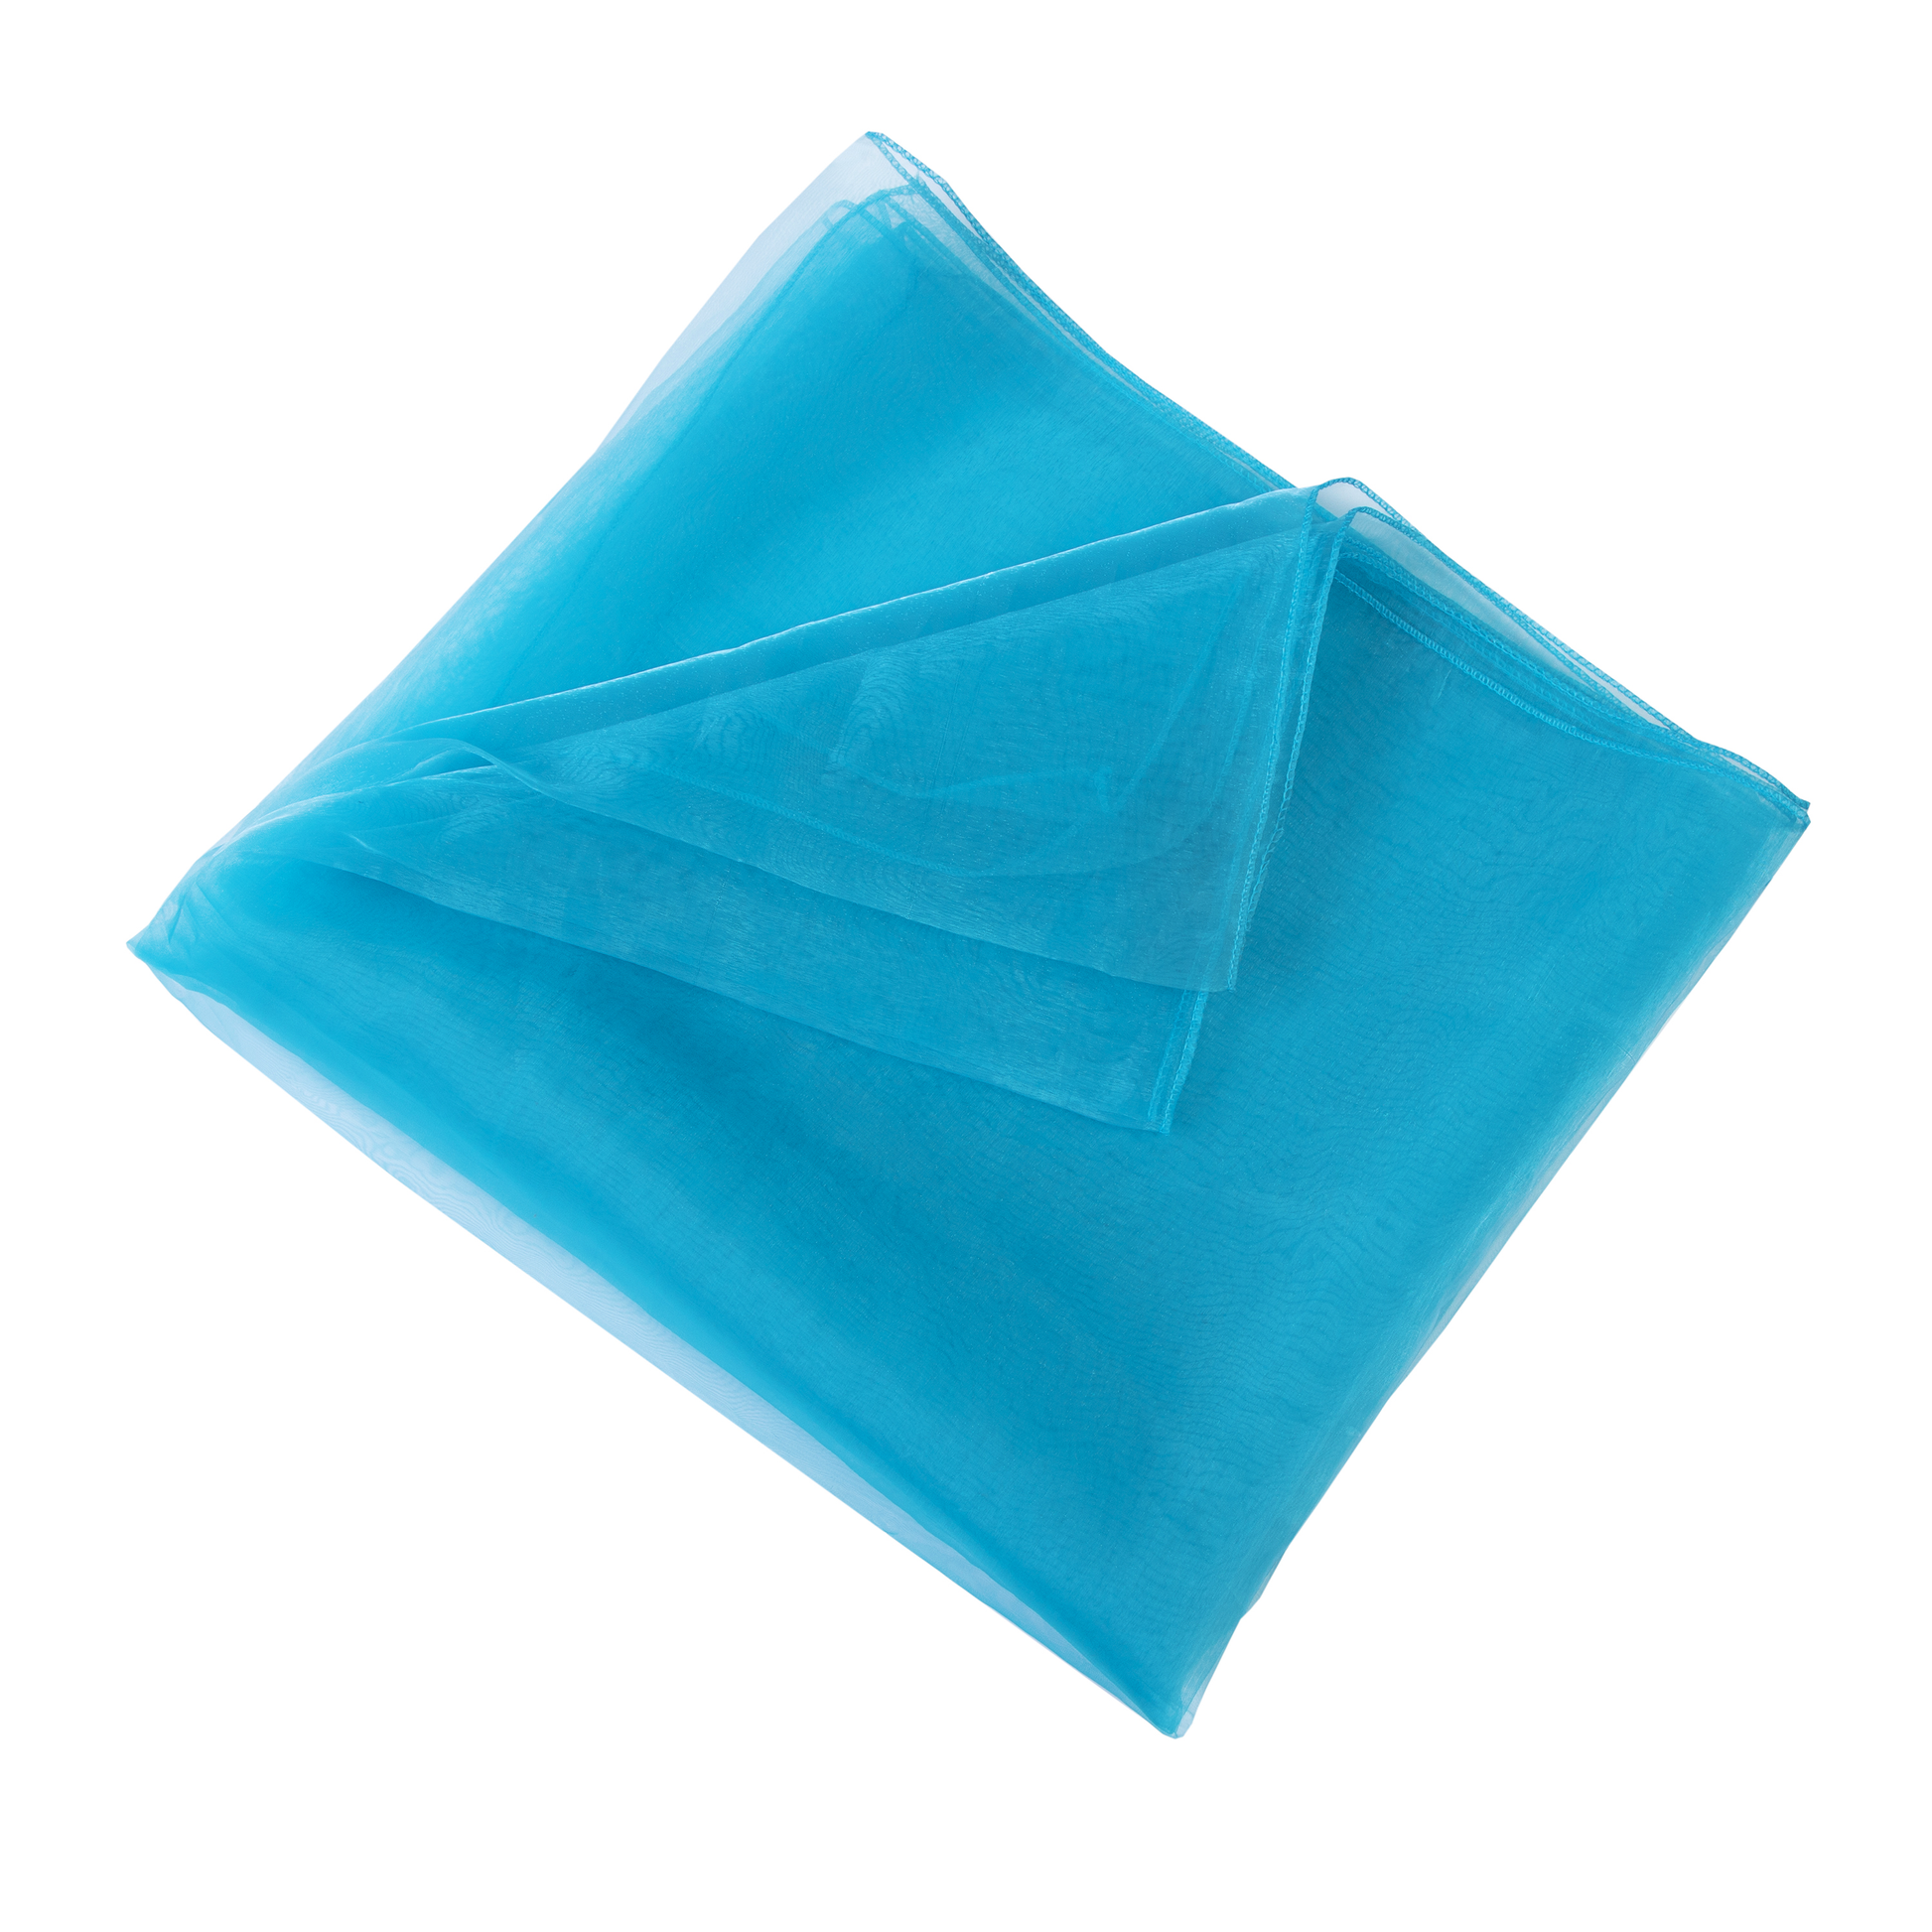 Turquoise,37ab8052-900f-4311-8607-8d684791dc62.png